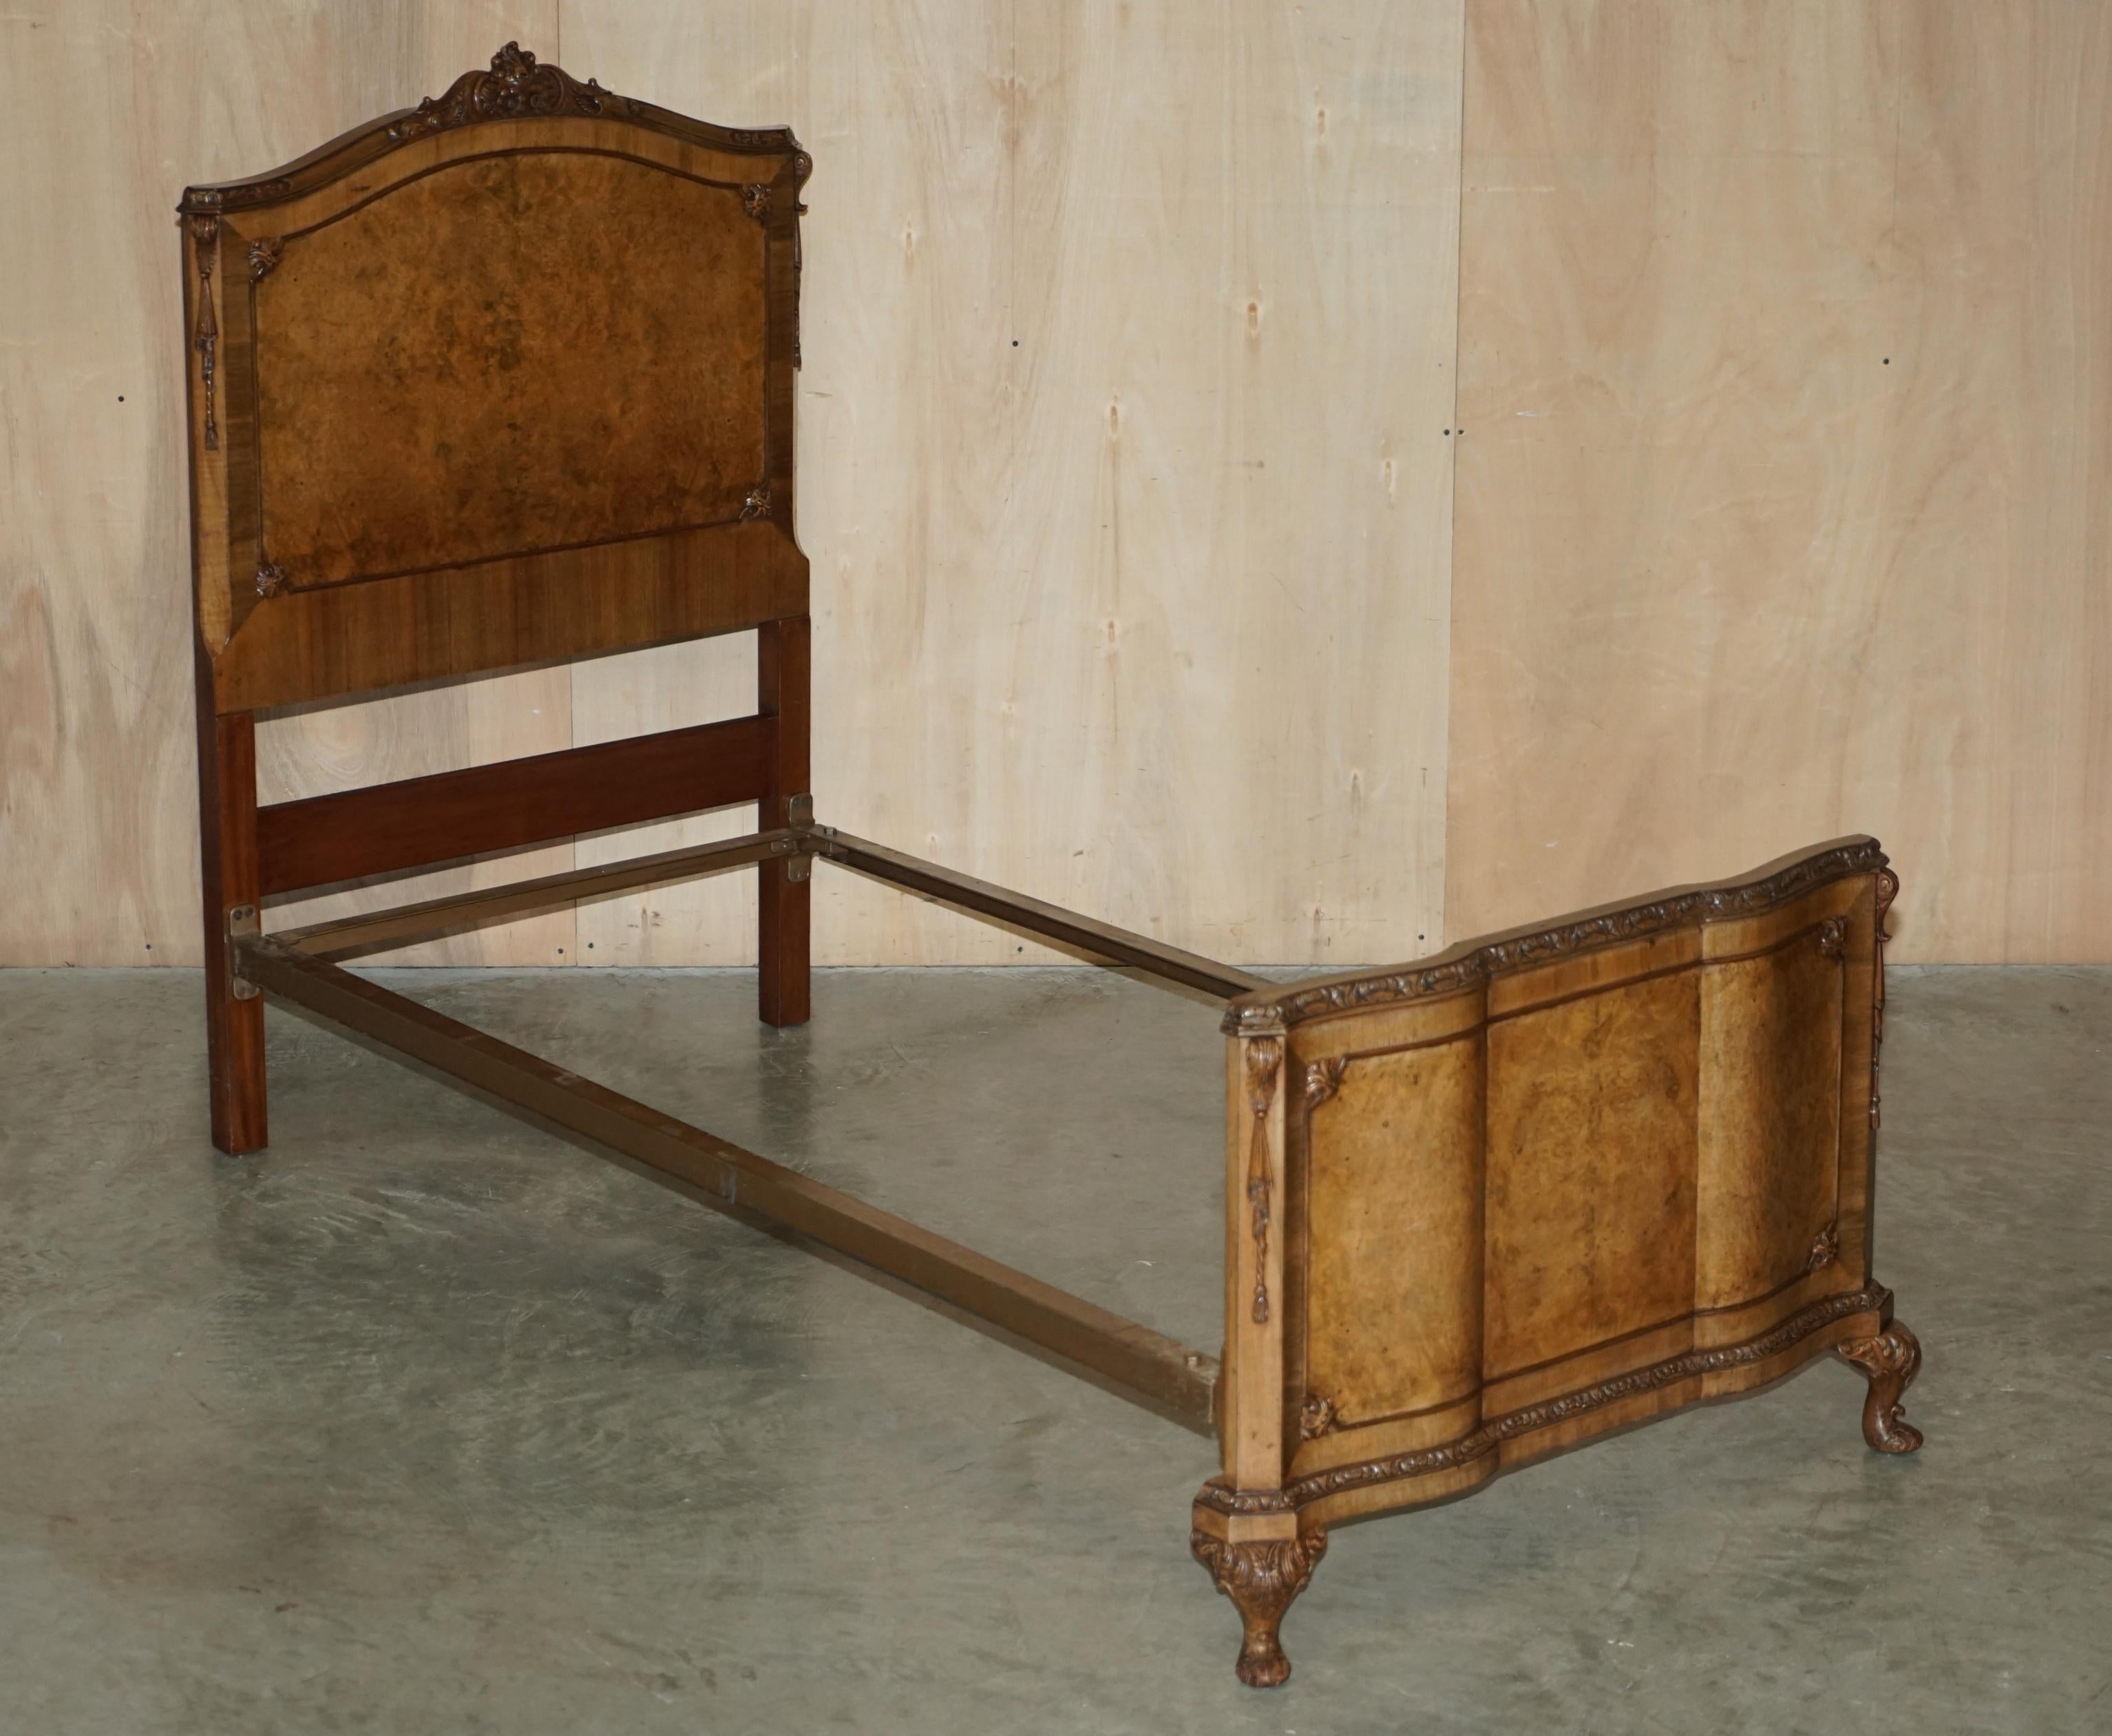 We are delighted to offer for sale this finest quality, pair of hand carved Burr Walnut Bedsteads which are part of a large suite 

This pair are part of a large bedroom set, I have in total a pair of wardrobes, a dressing table with trifold